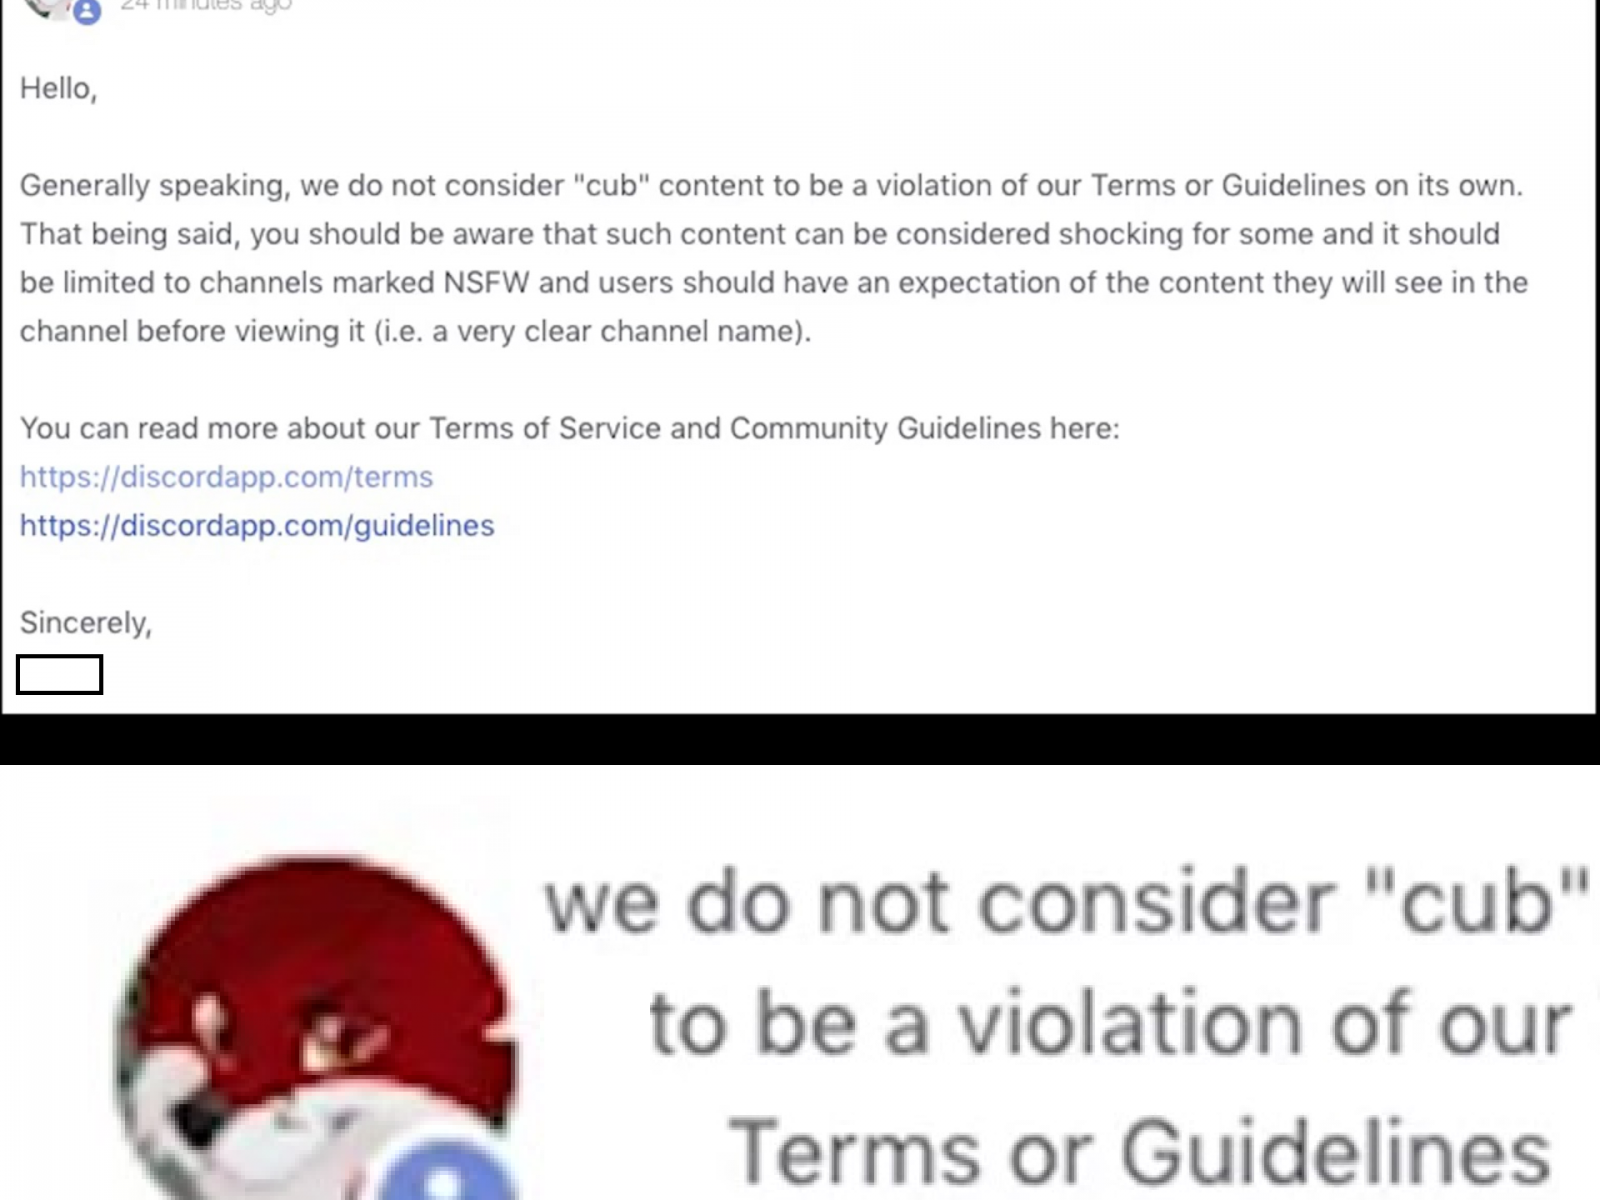 Discord Comes Under Fire For Alleged Moderator Abuse And Furry